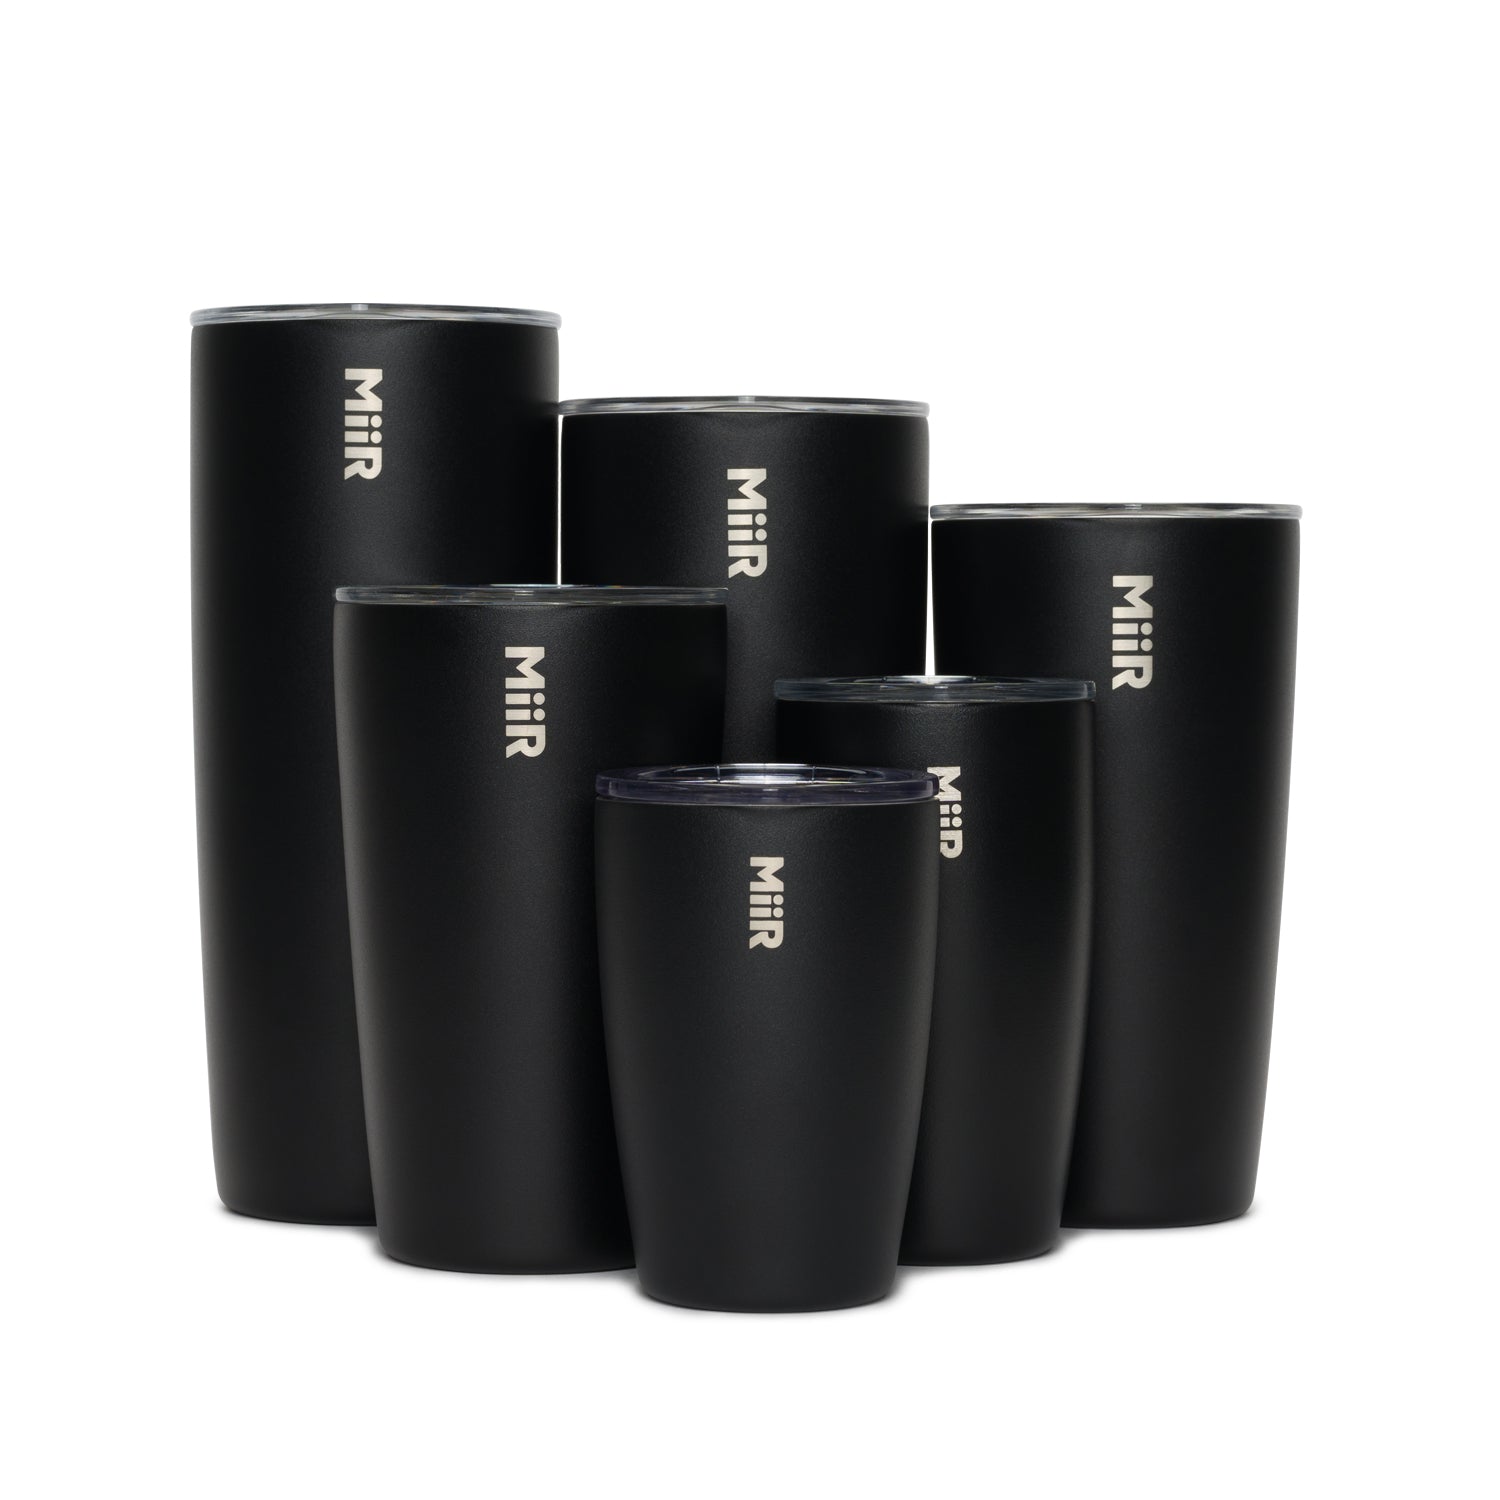 Stainless Steel Tumbler Cup - 250 ml / 8 oz